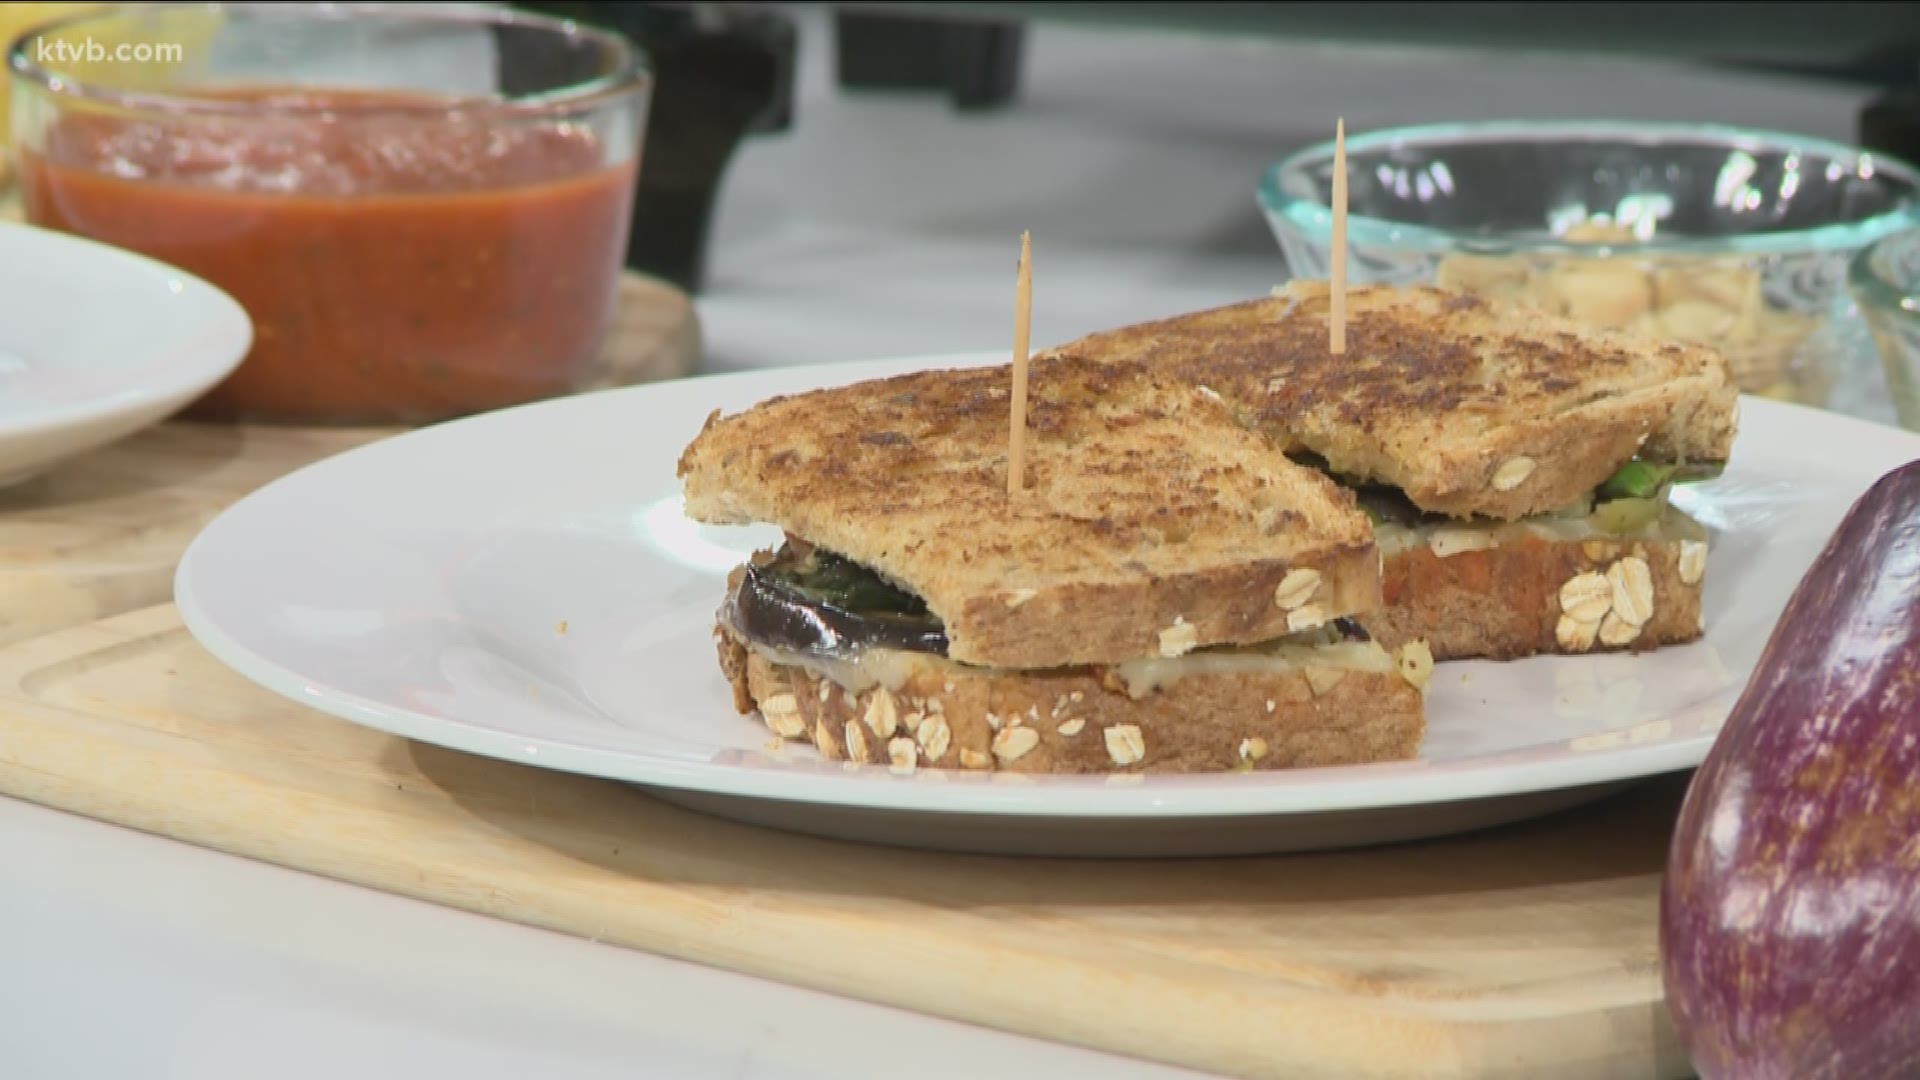 Registered dietitian Molly Tevis shows us how to make some simple and healthy grilled cheese sandwiches.